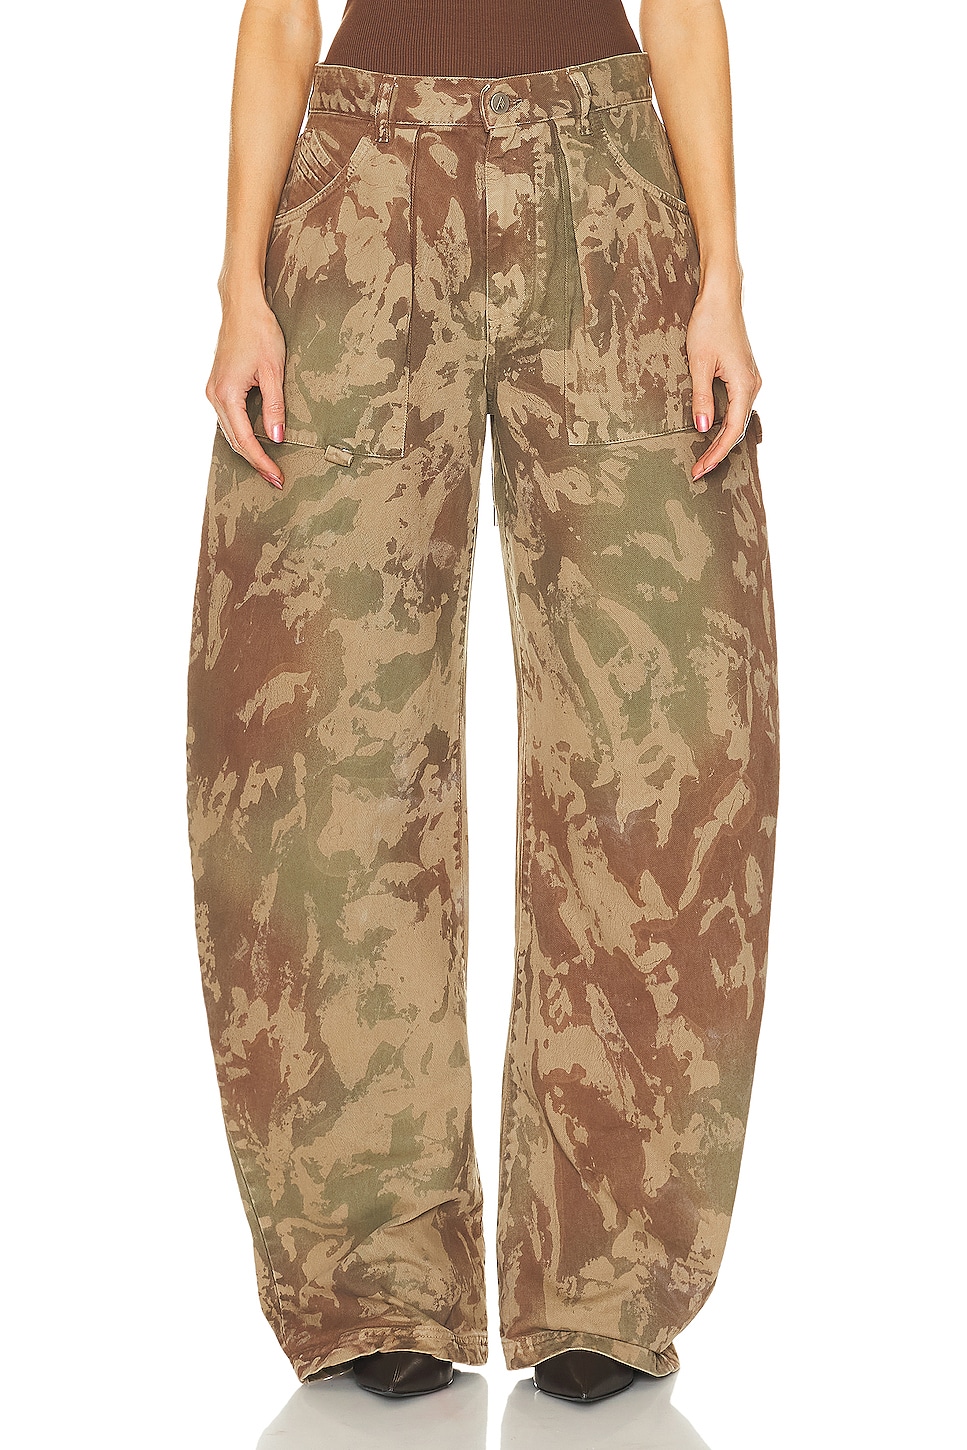 Image 1 of THE ATTICO Effie Long Pant in Chocolate, Eden Green, & Sand